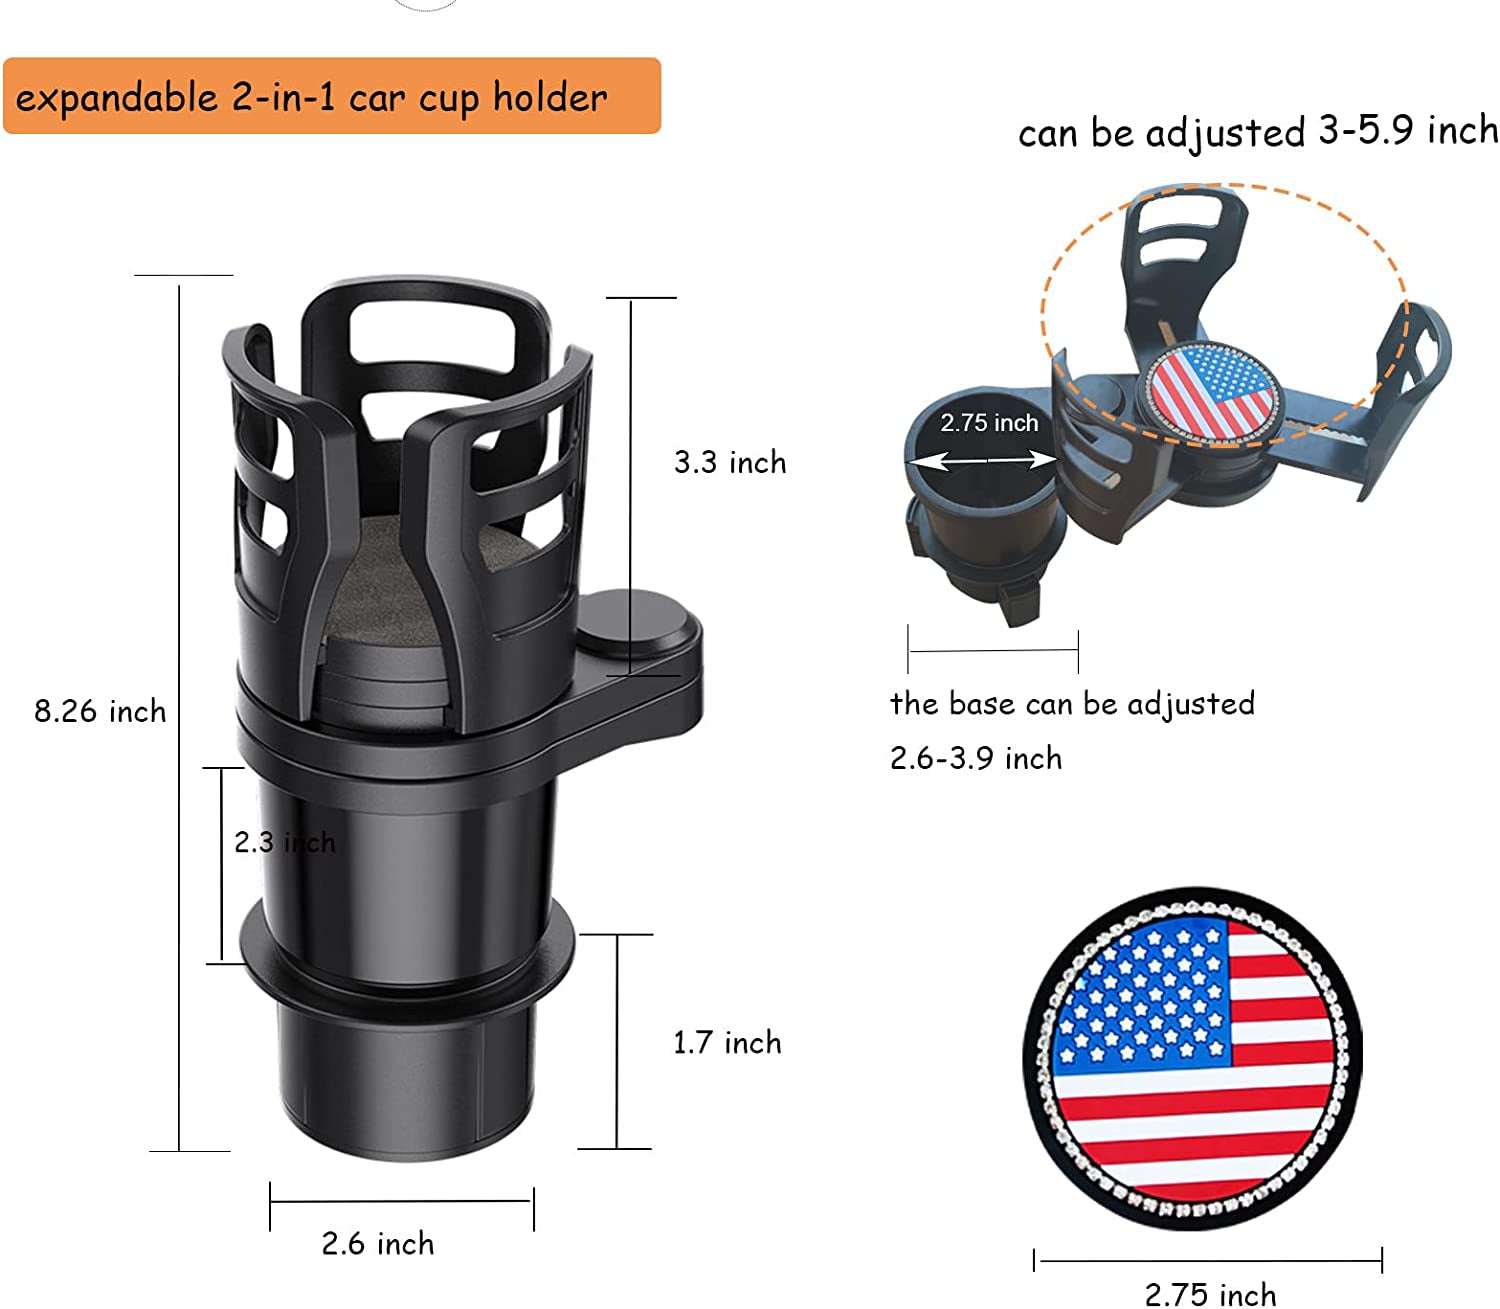 Car Cup Holder Expander, 2 in 1 Multifunctional Vehicle Mounted Cup Holder Extender with Adjustable Base, 360°Rotating Dual Cup Holder Adapter Universal Insert Car Cup Holders with Free Coasters